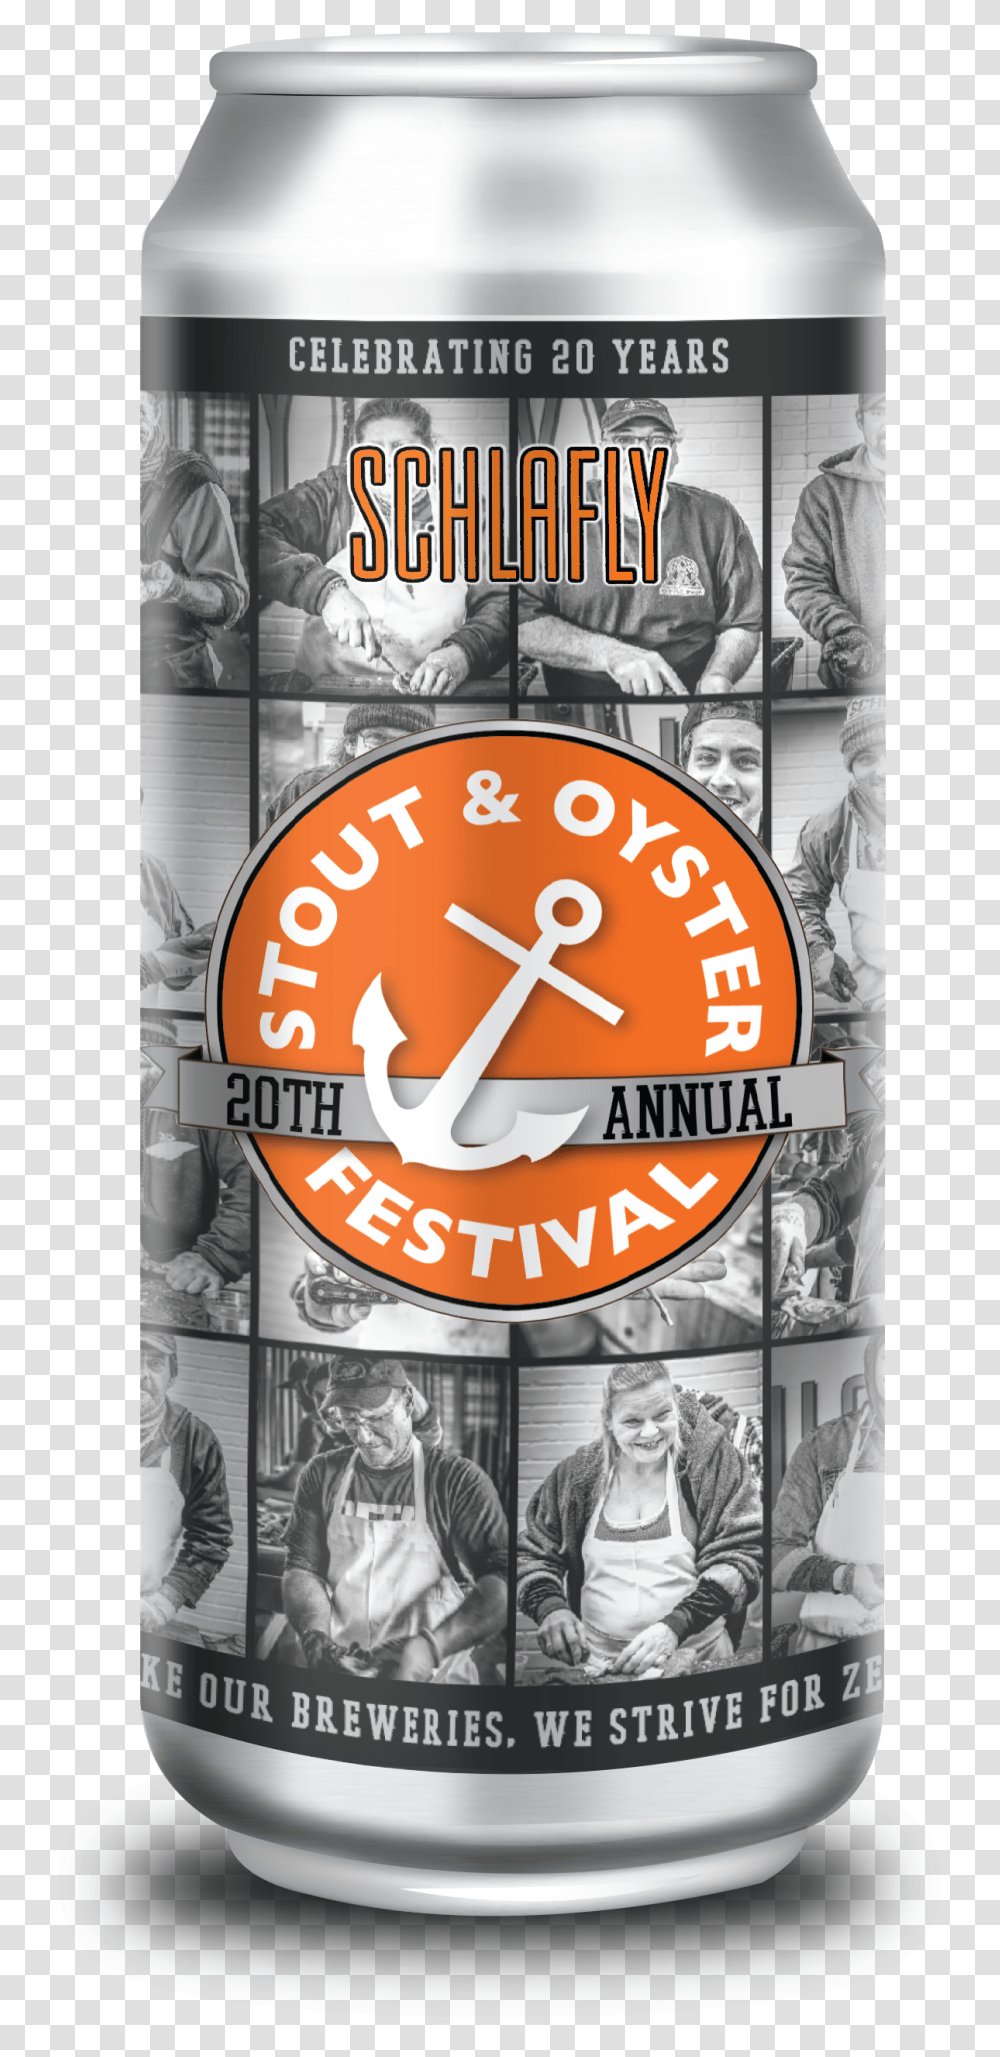 Schlafly Oyster Stout CanClass Img Responsive Owl Warthog, Person, Human, Poster, Advertisement Transparent Png